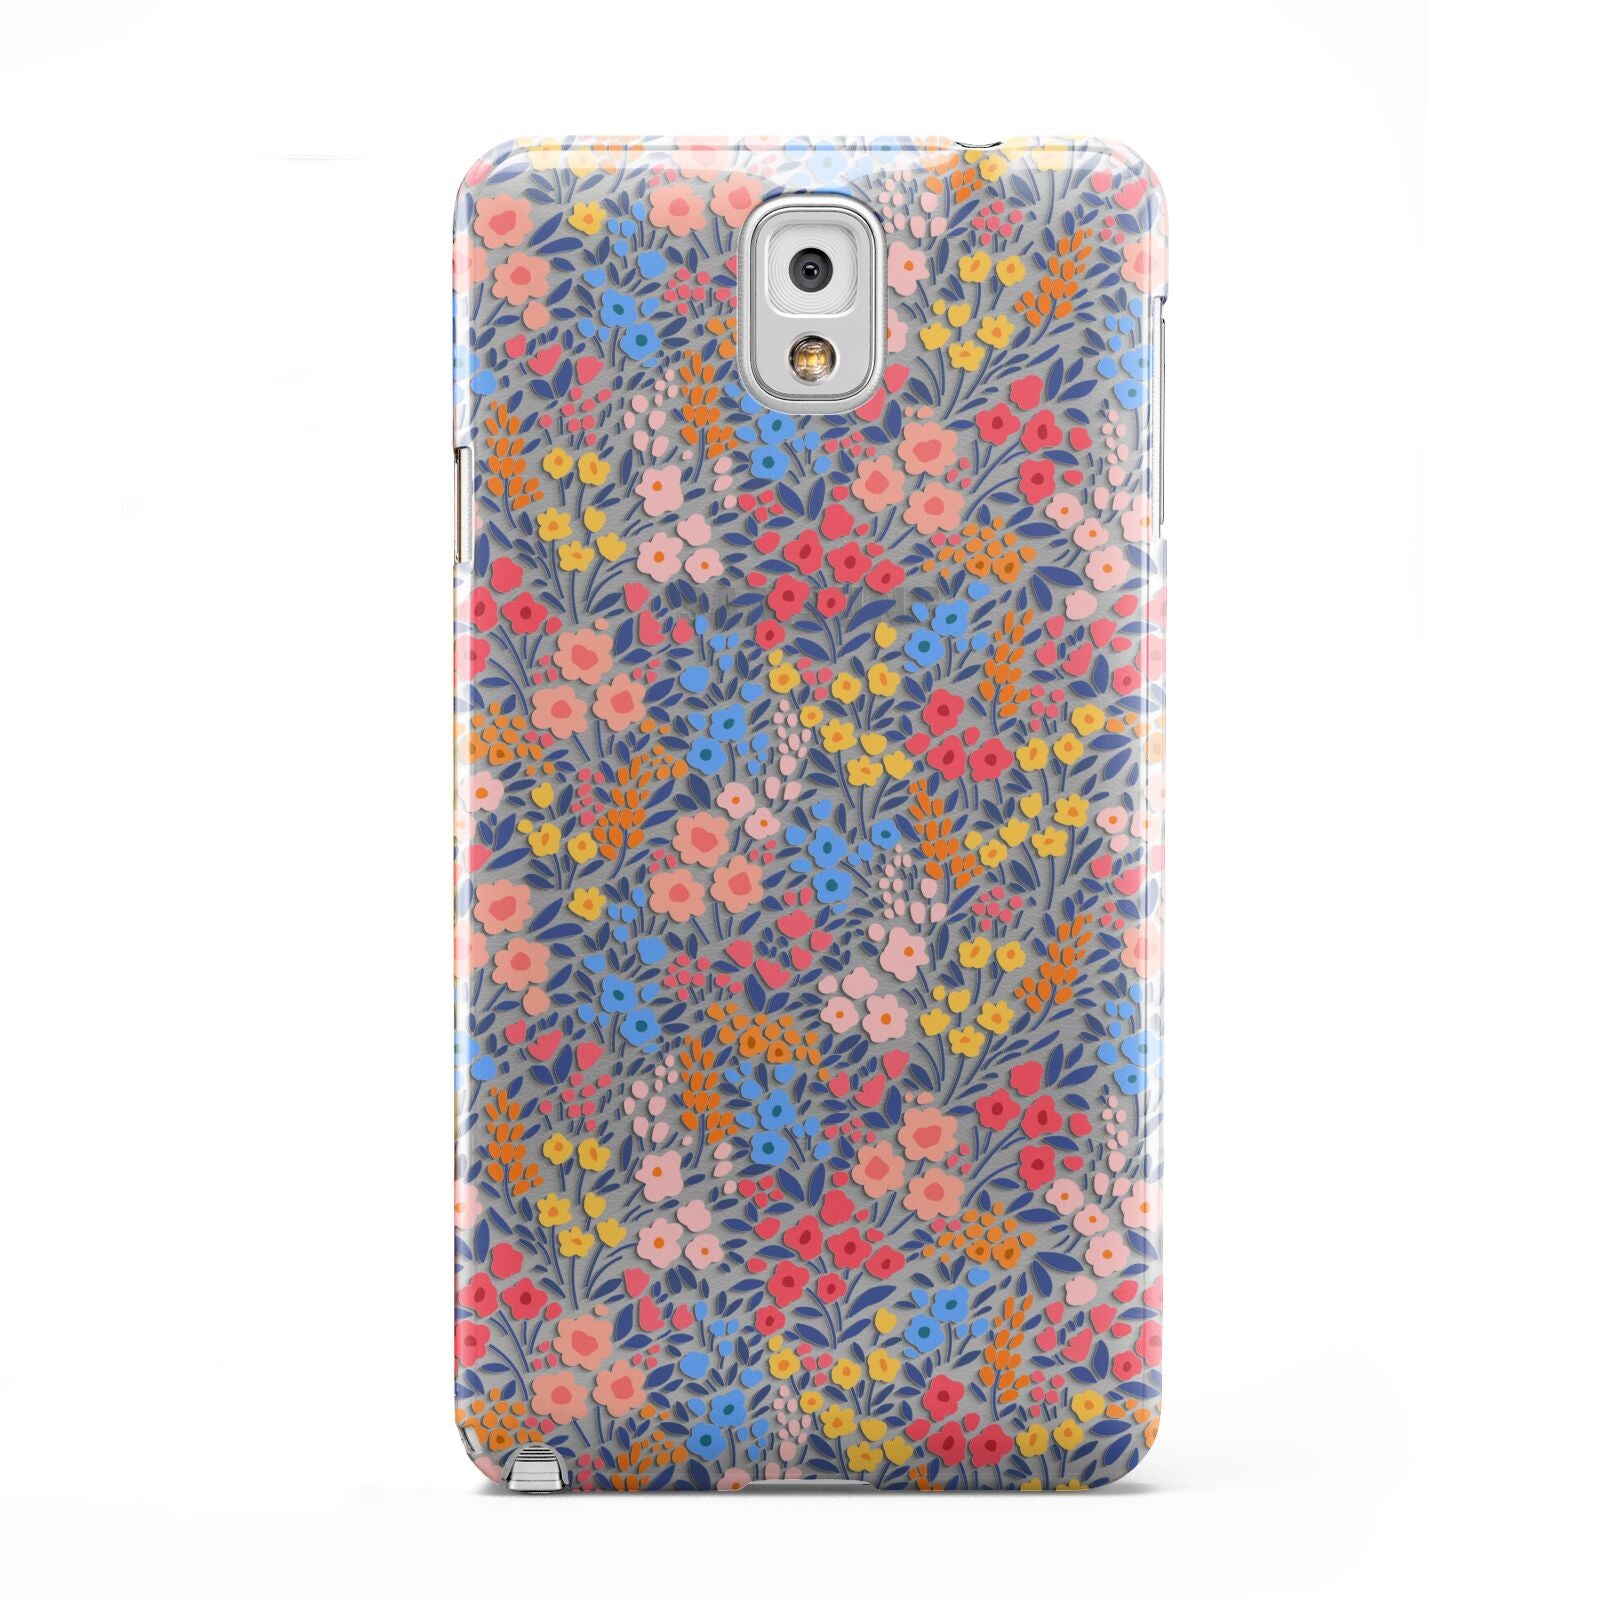 Small Flowers Samsung Galaxy Note 3 Case